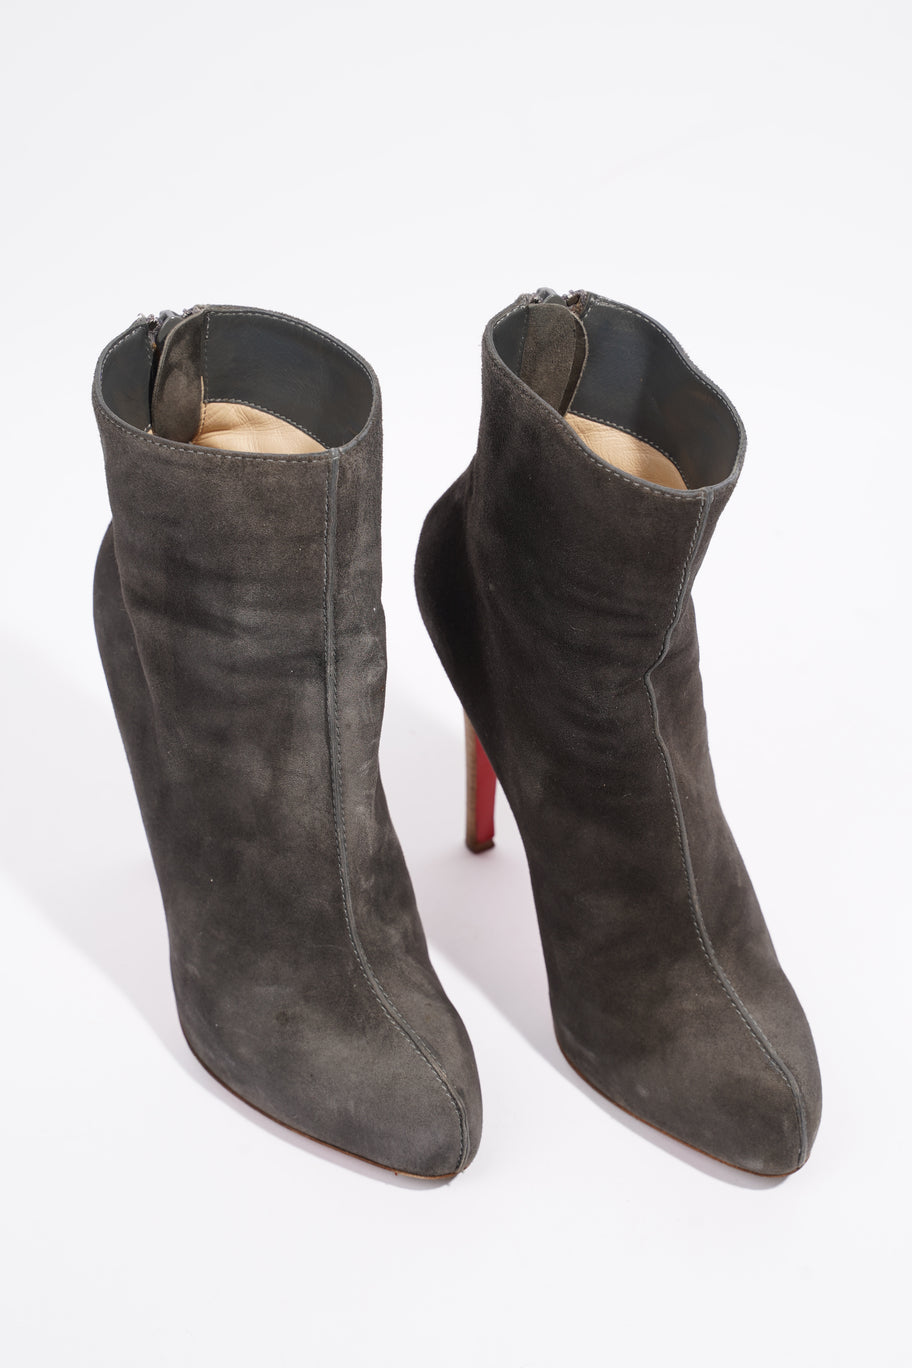 Ankle Boot Grey Suede EU 38 UK 5 Image 8